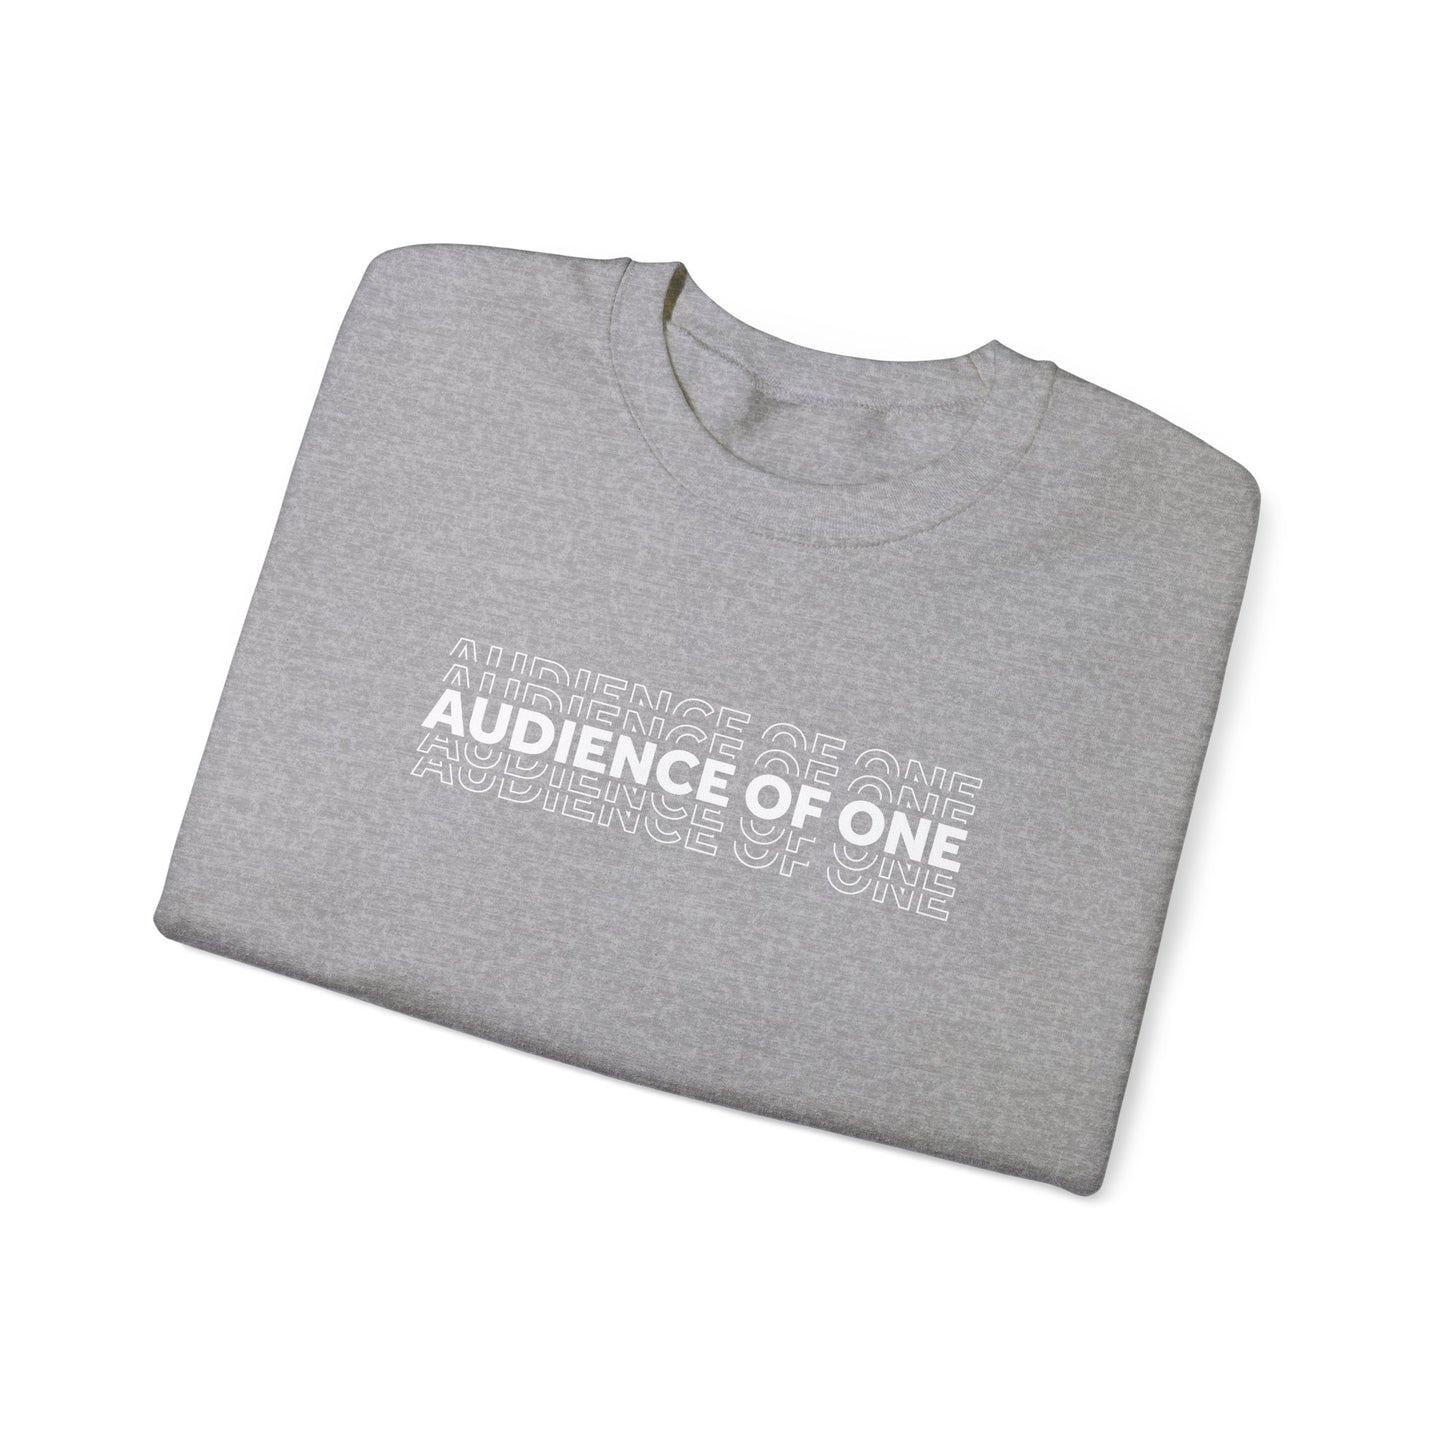 Emma Brown: Audience of One Crewneck